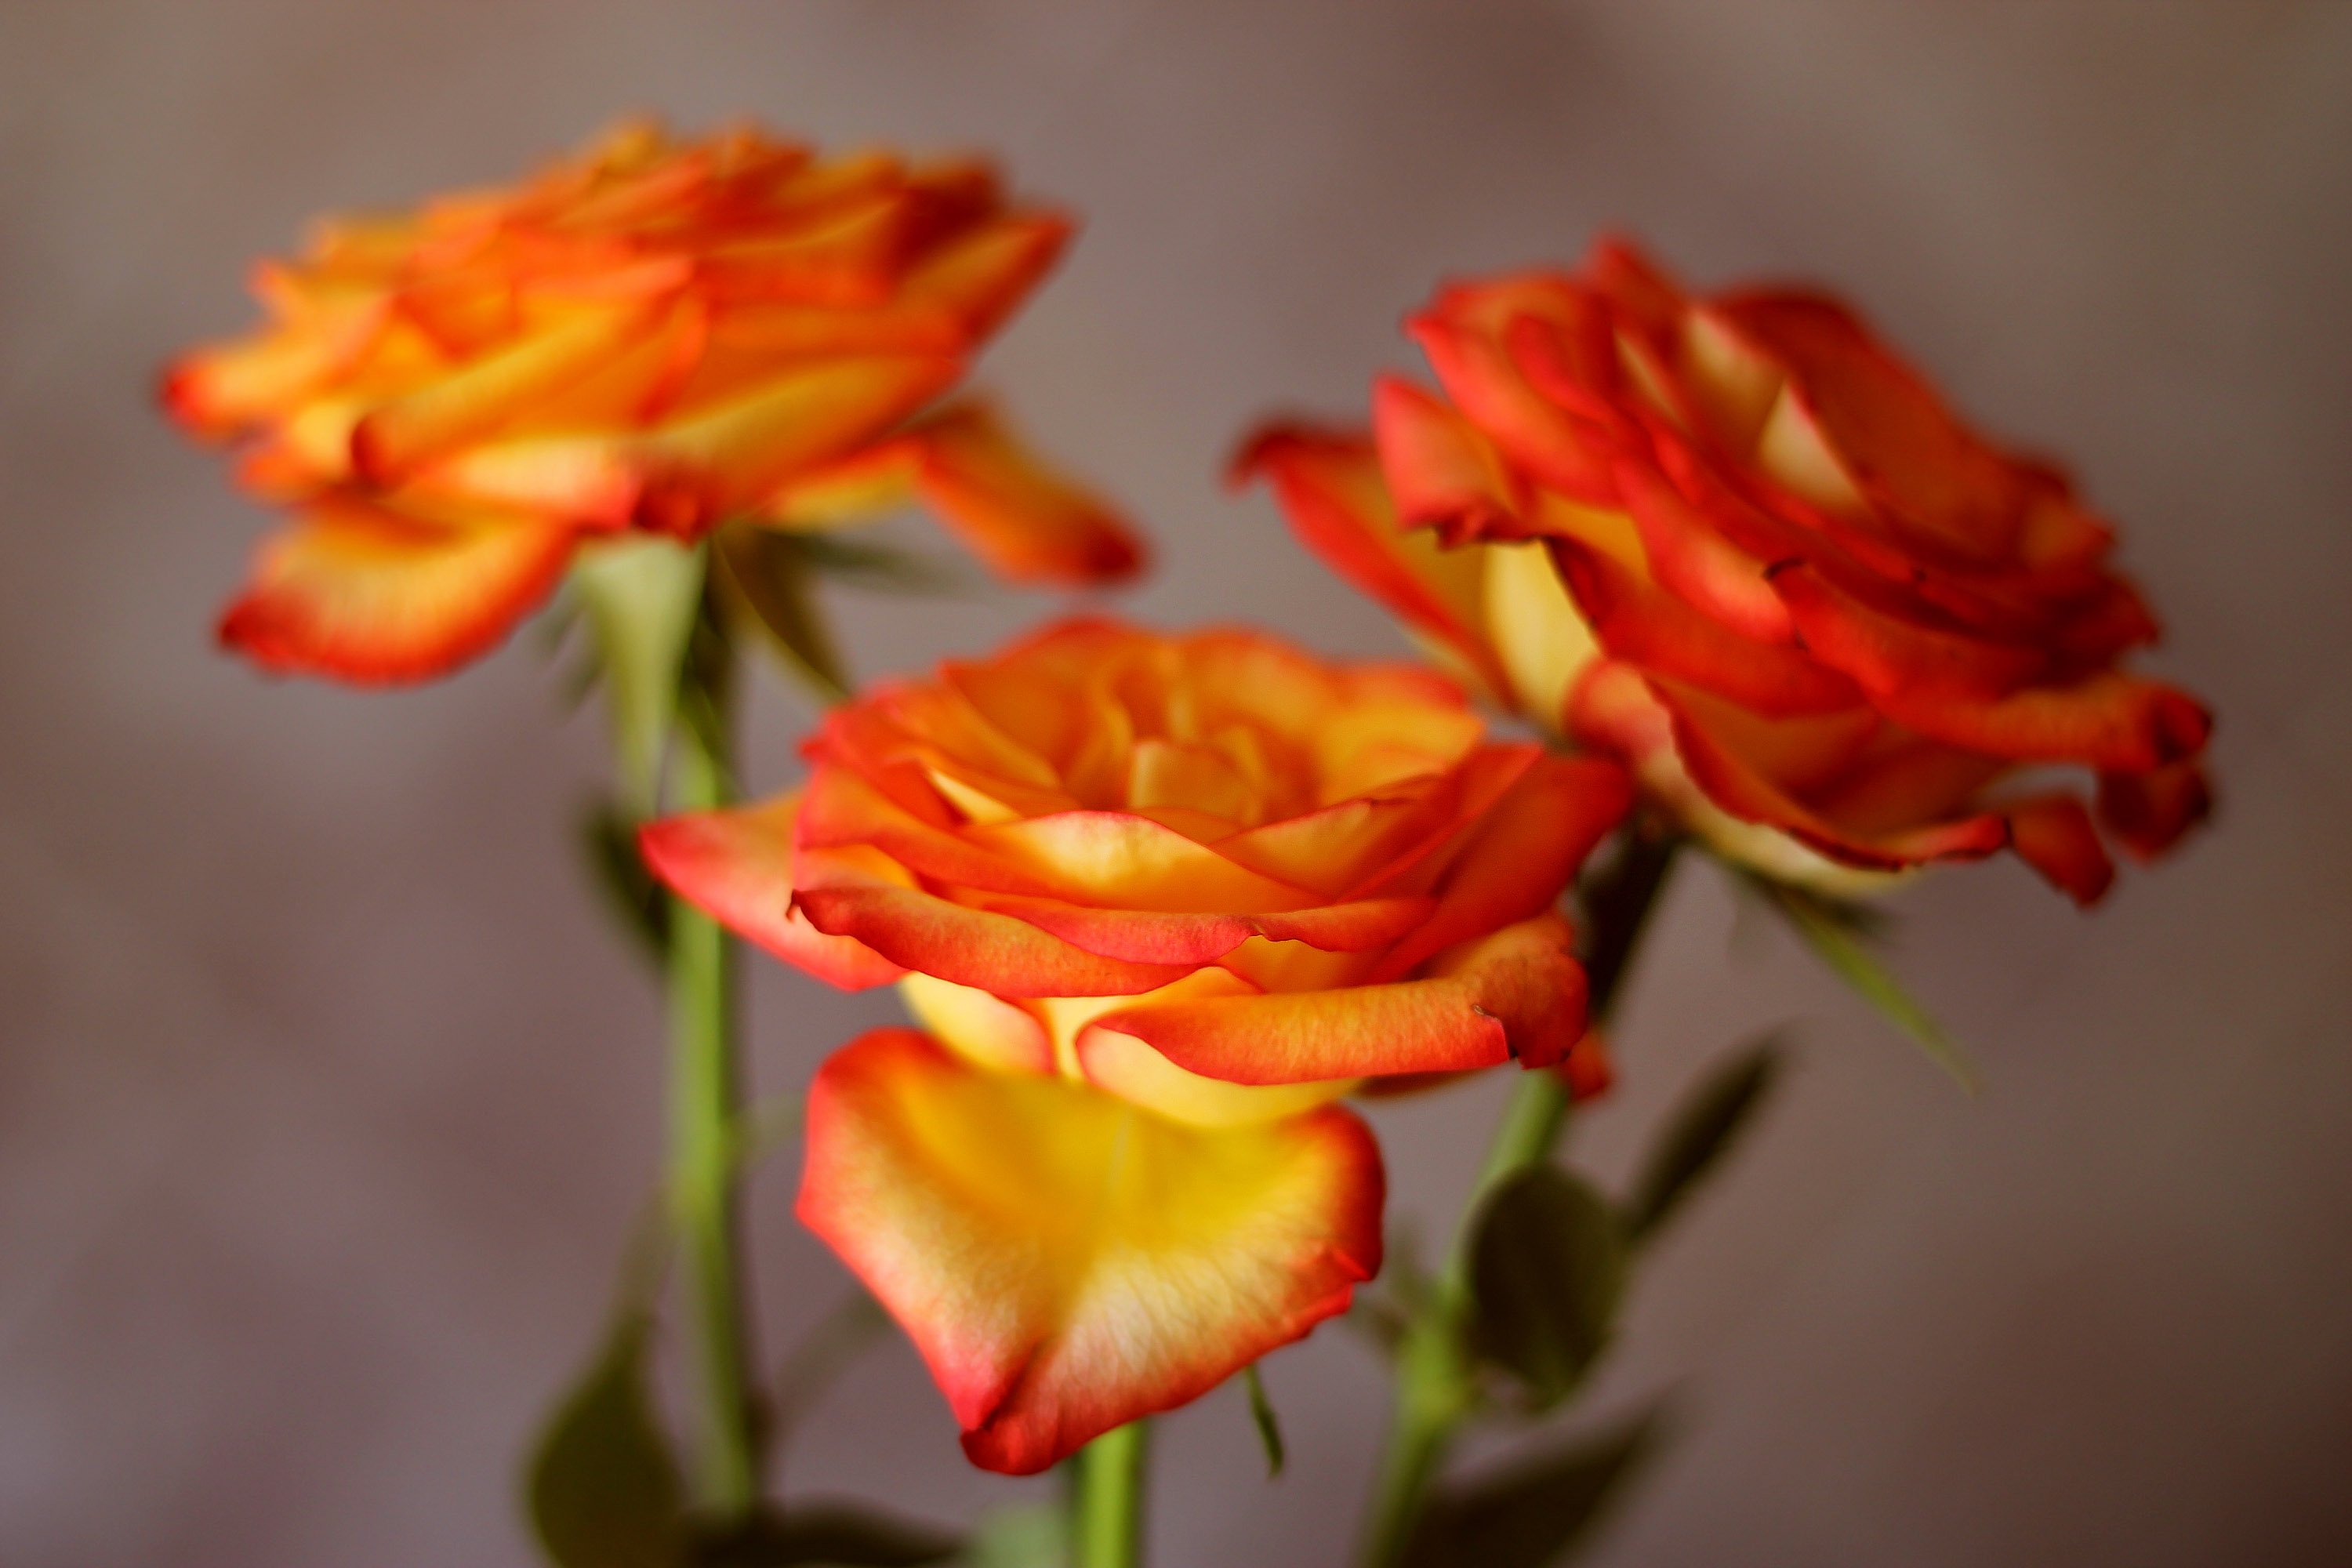 Rose Hd Wallpapers For Mobile - Three Flower In Hd - HD Wallpaper 